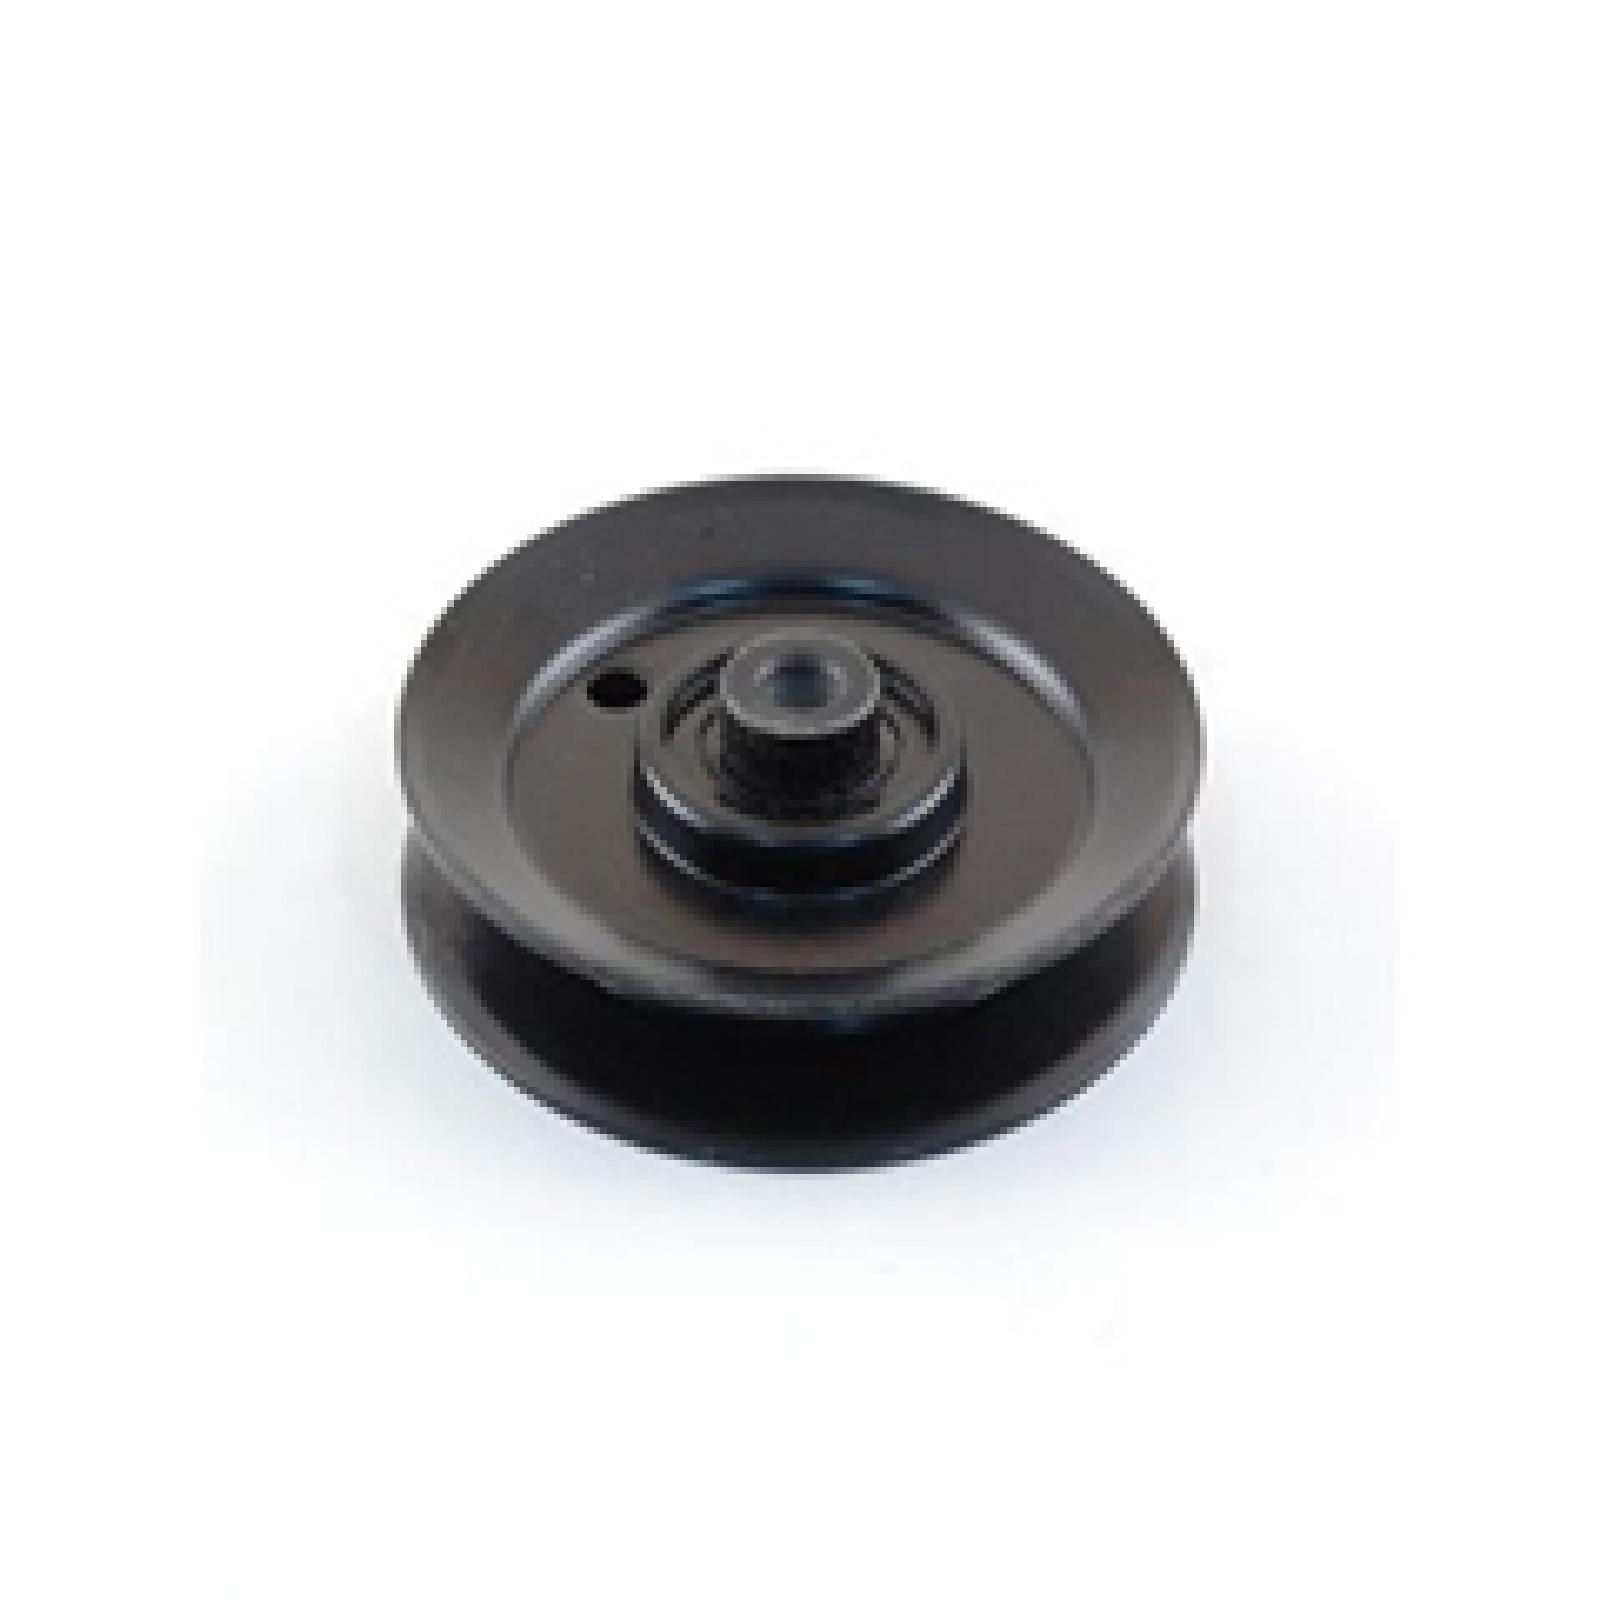 PULLEY IDLER part# 756-1208 by MTD